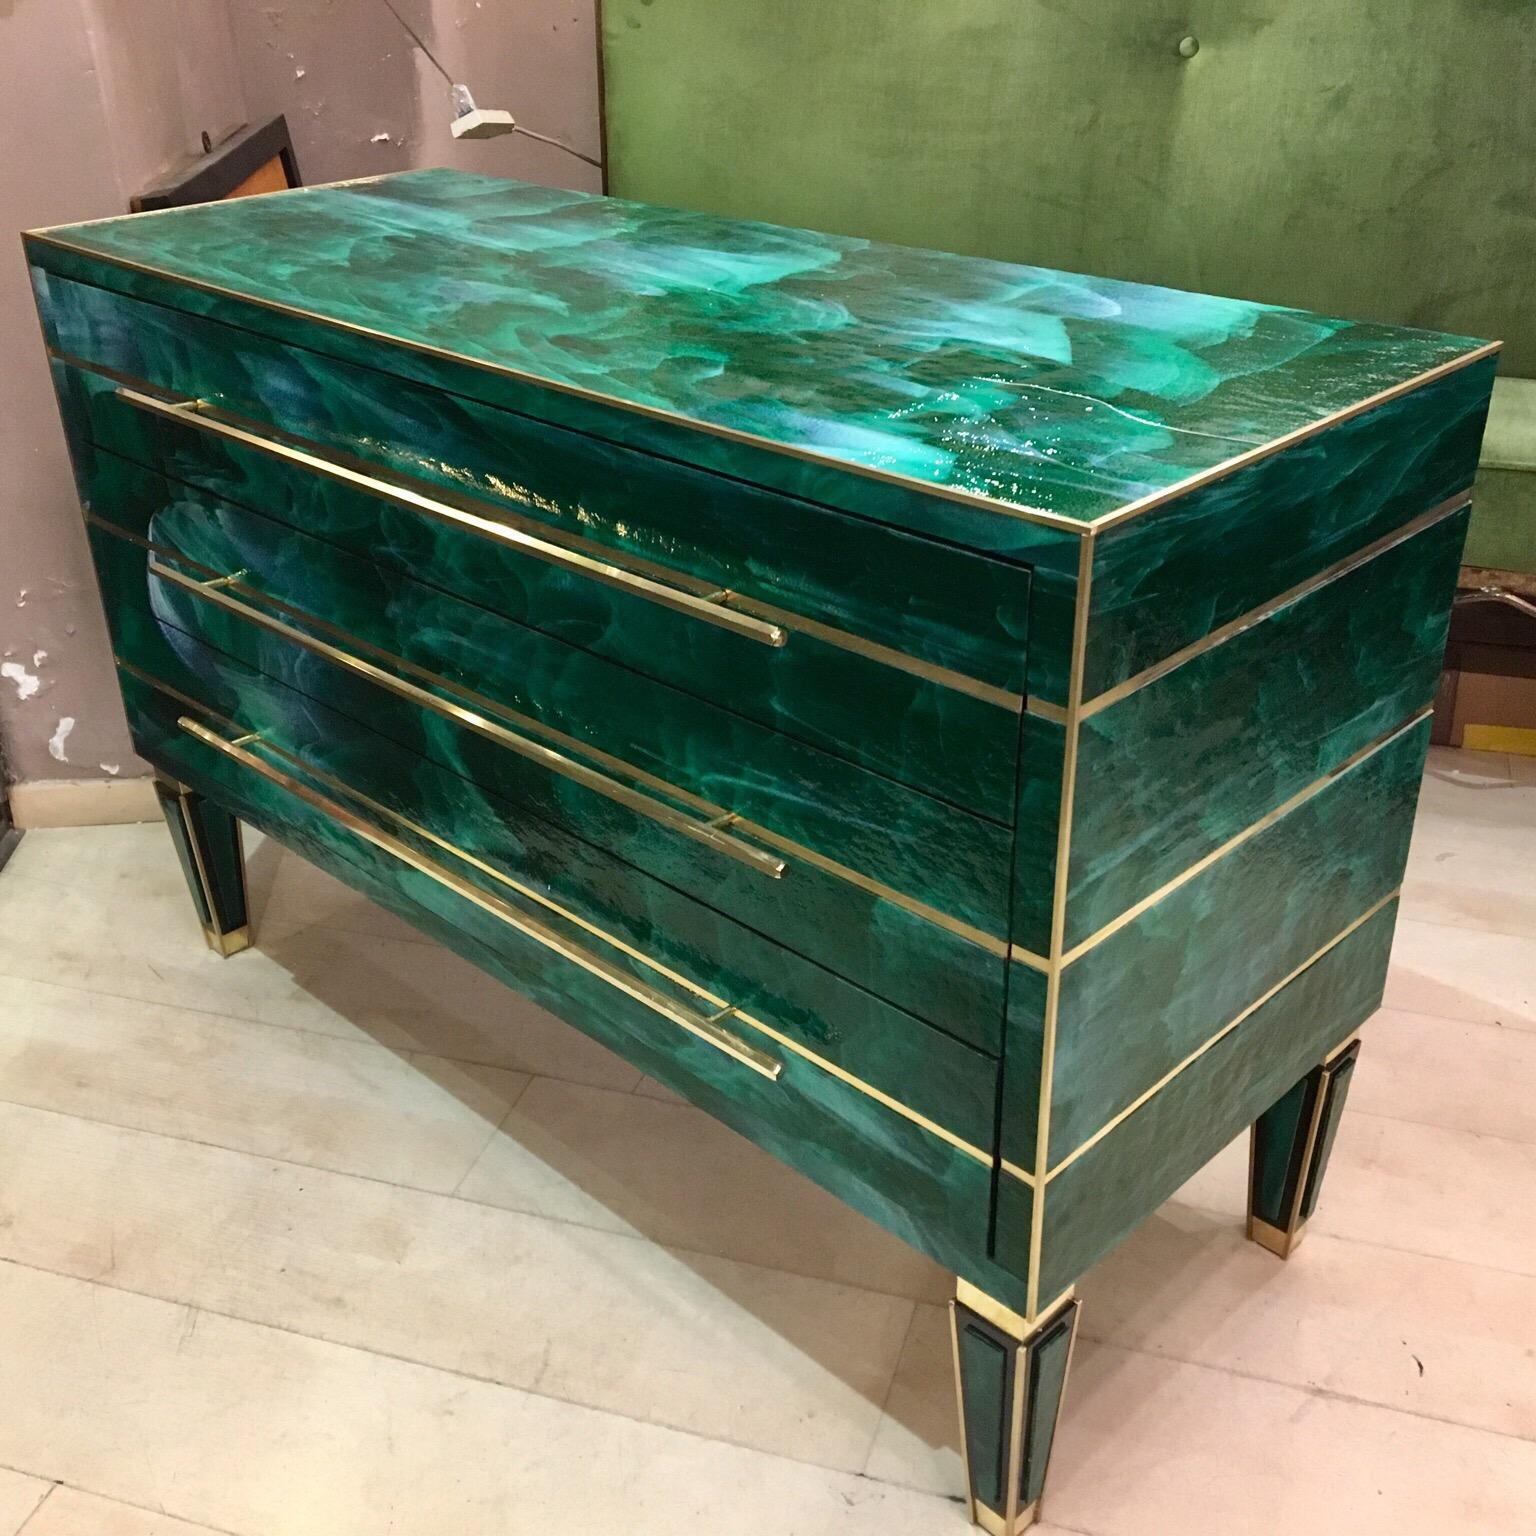 This green opaline glass chest of drawers presents typical brass inlays from the 1980s, brass handles with hexagonal section, pyramid-shaped legs, three drawers. 

The opaline glass that covers the furniture is made of a melange of green and light